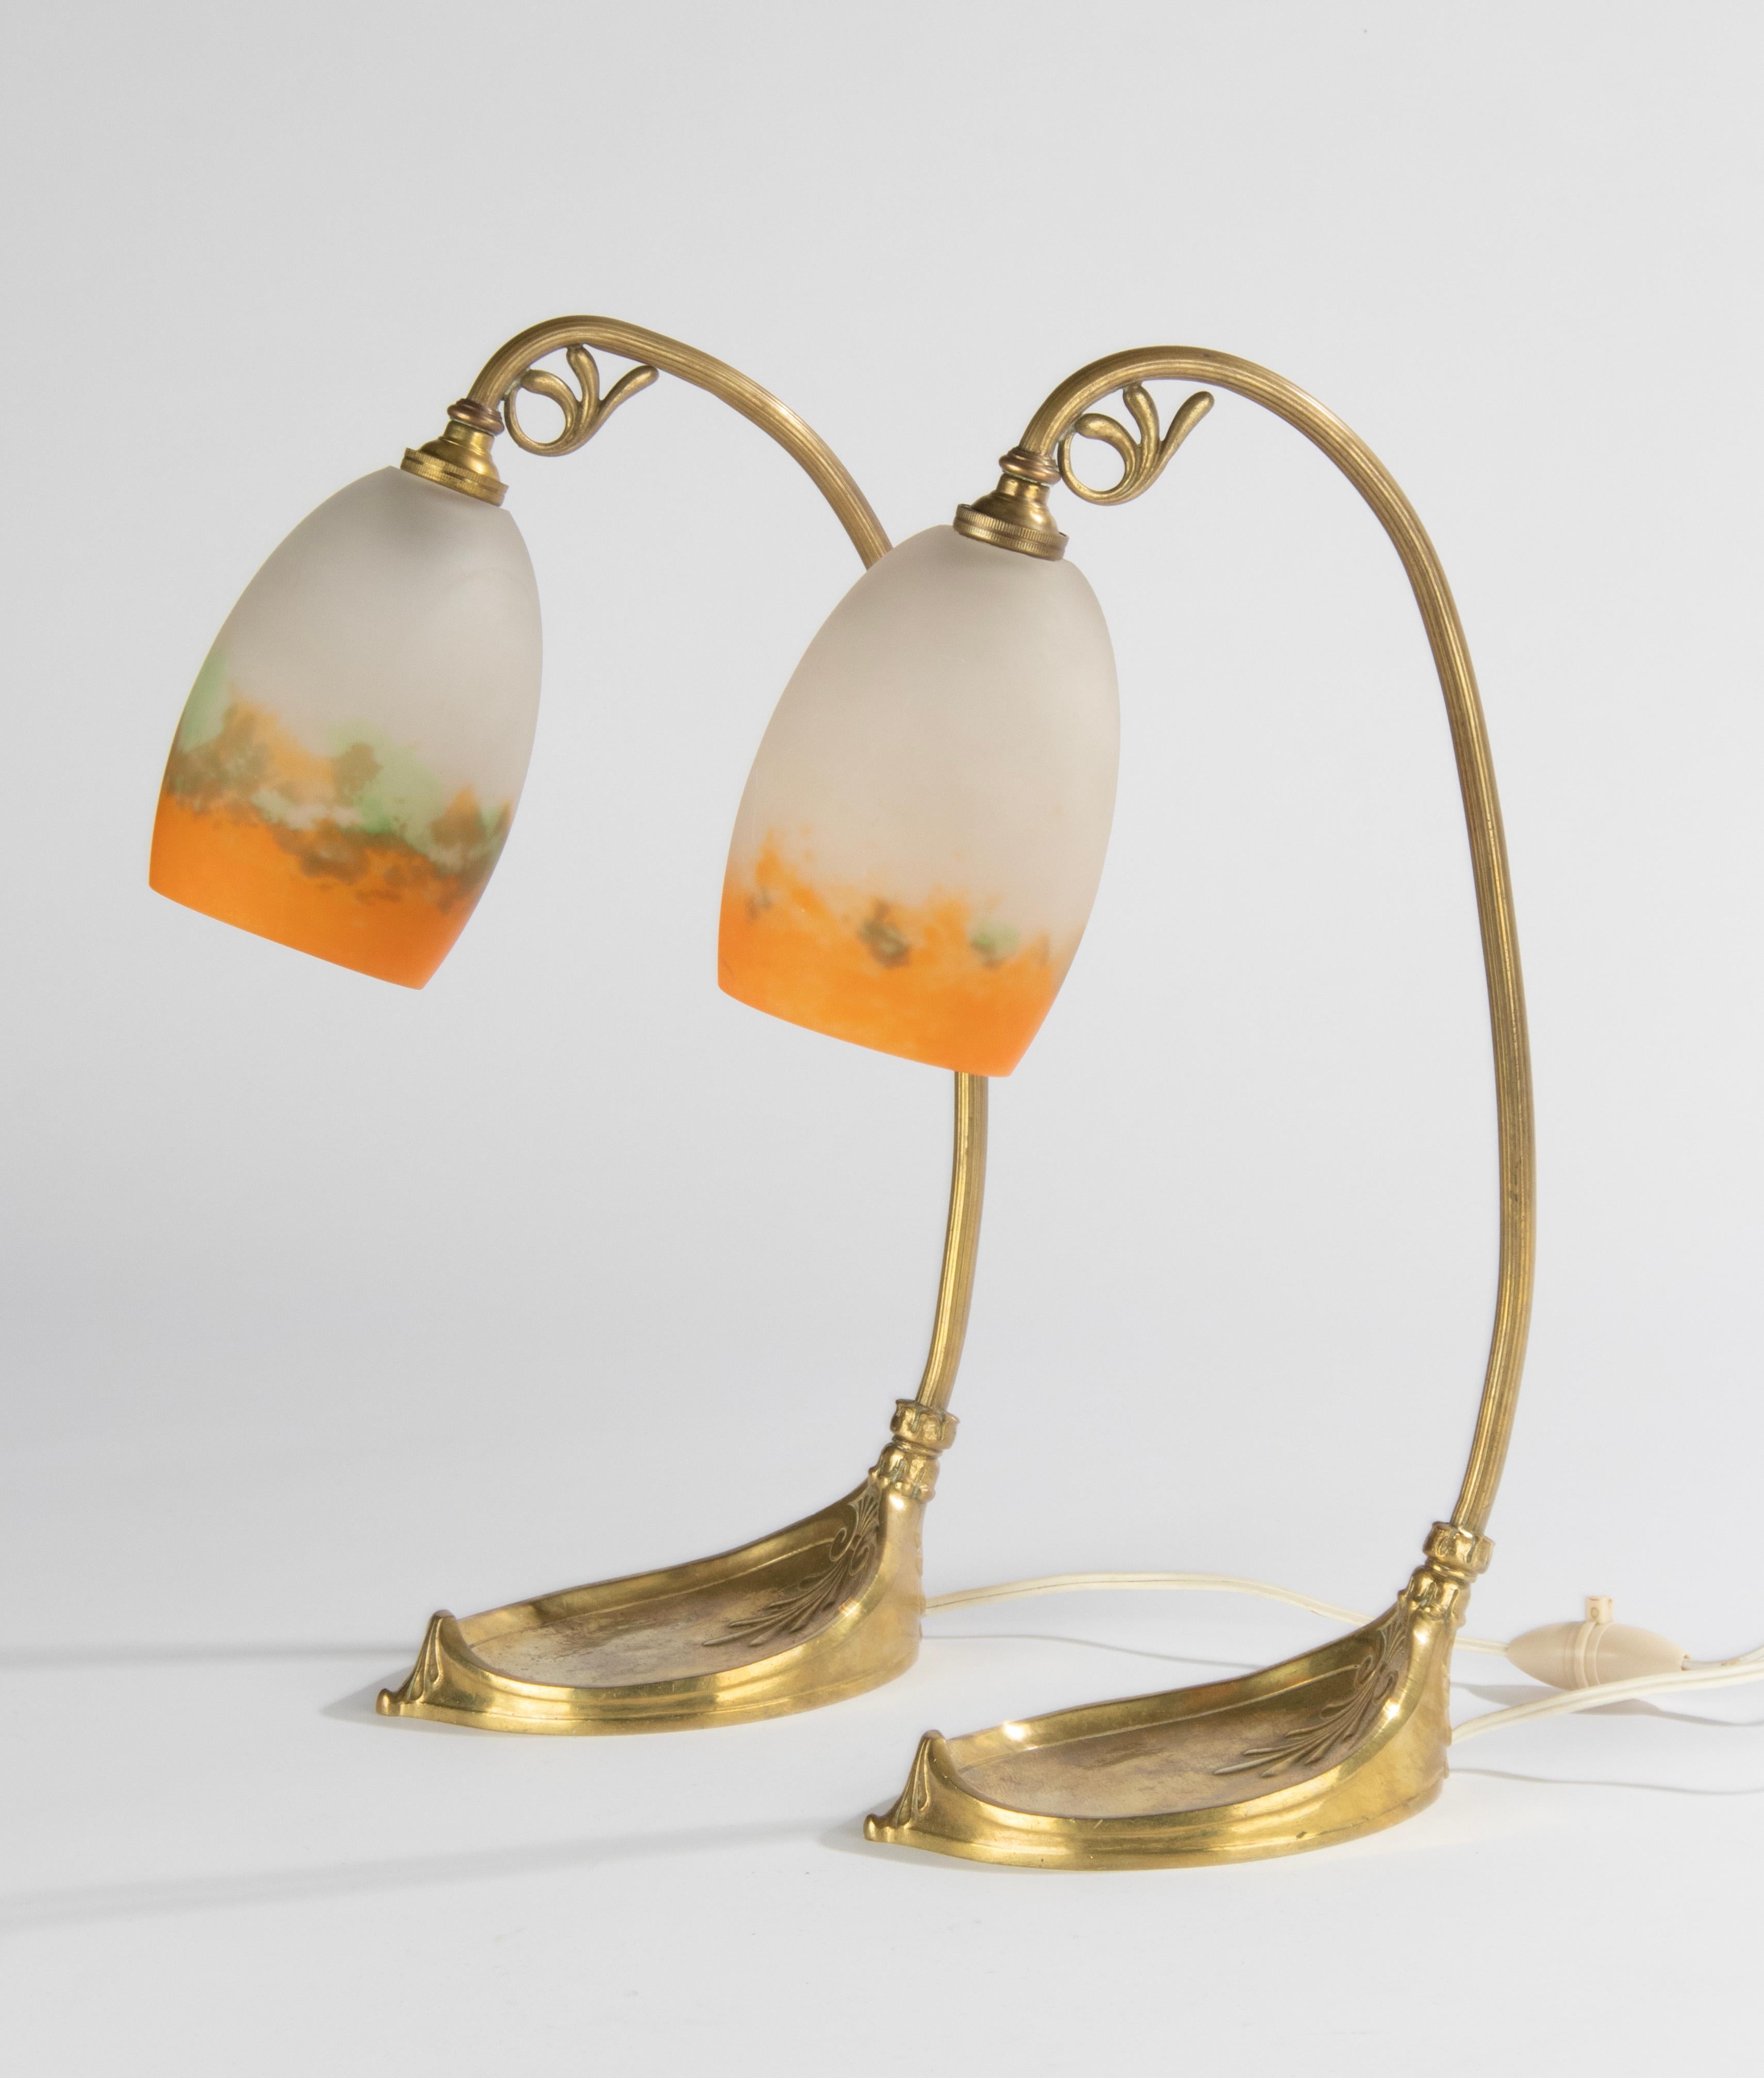 A pair of Muller table lamps from the French Art Nouveau period. The base is made of gilded bronze/brass. The lamps have pasta glass (pate de verre) lampshades, made and signed by Muller Frères from France. The glass has very nice bright green and